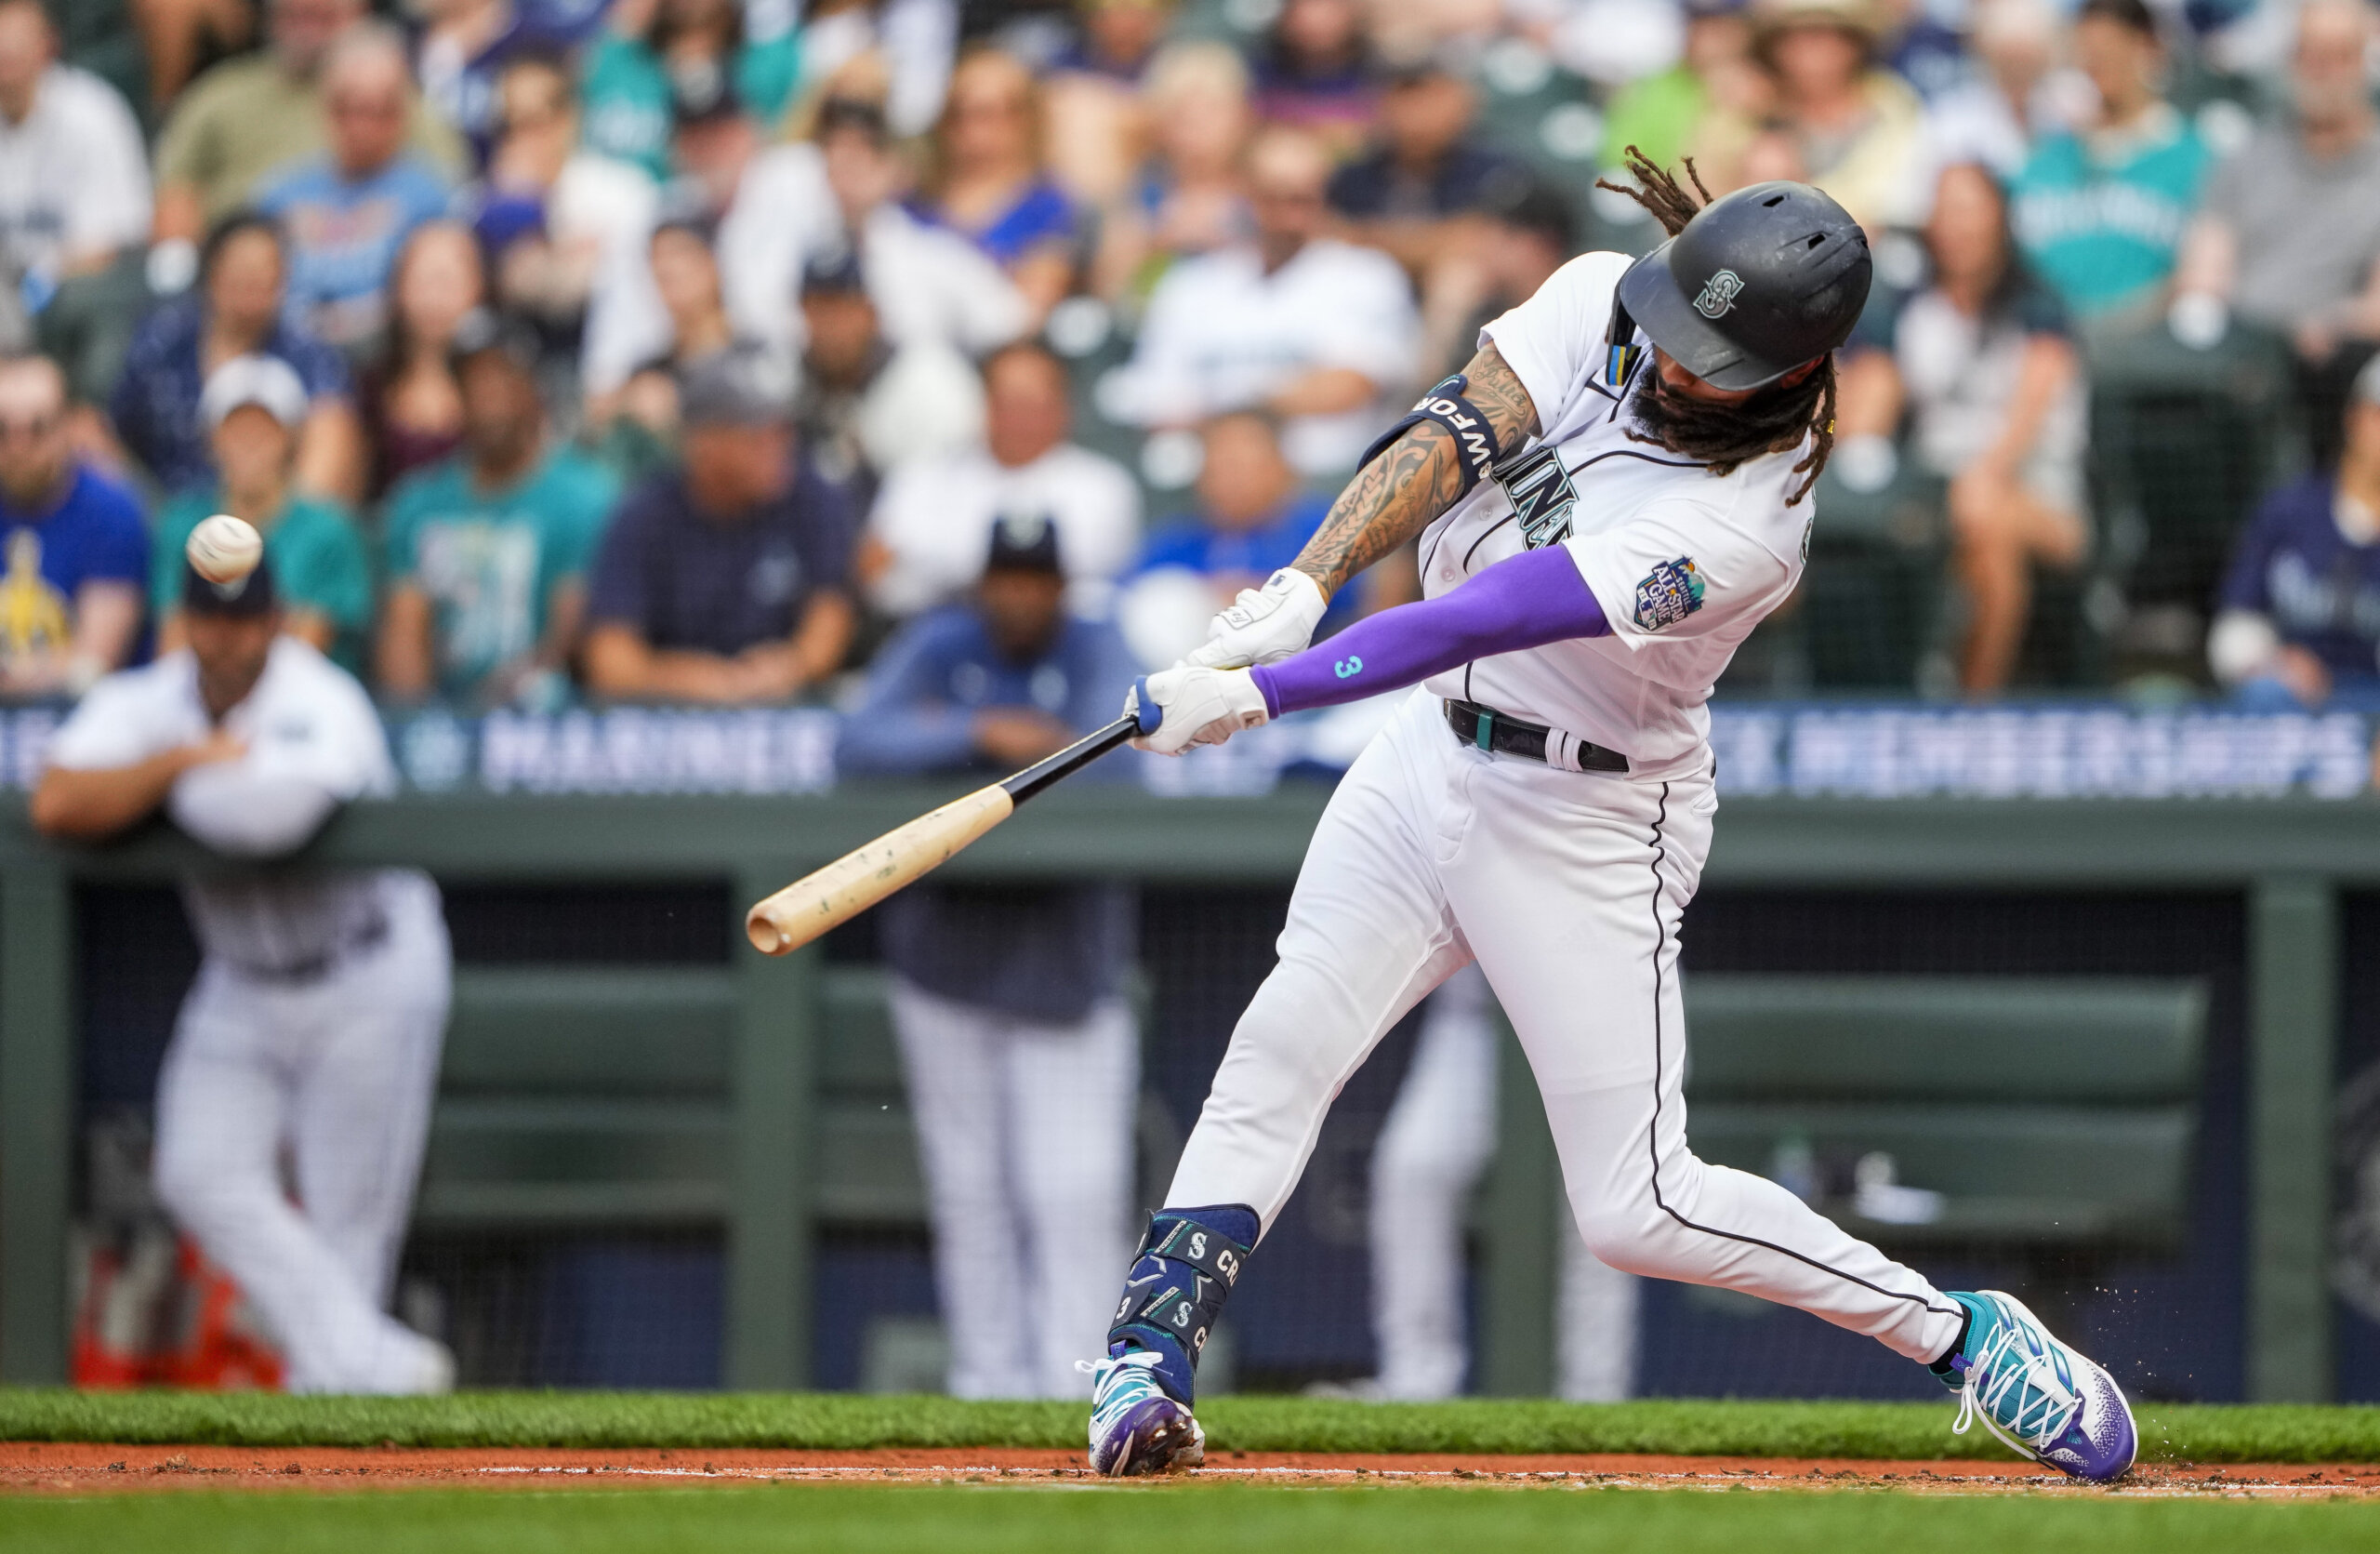 Mariners activate shortstop J.P. Crawford from 7-day injured list